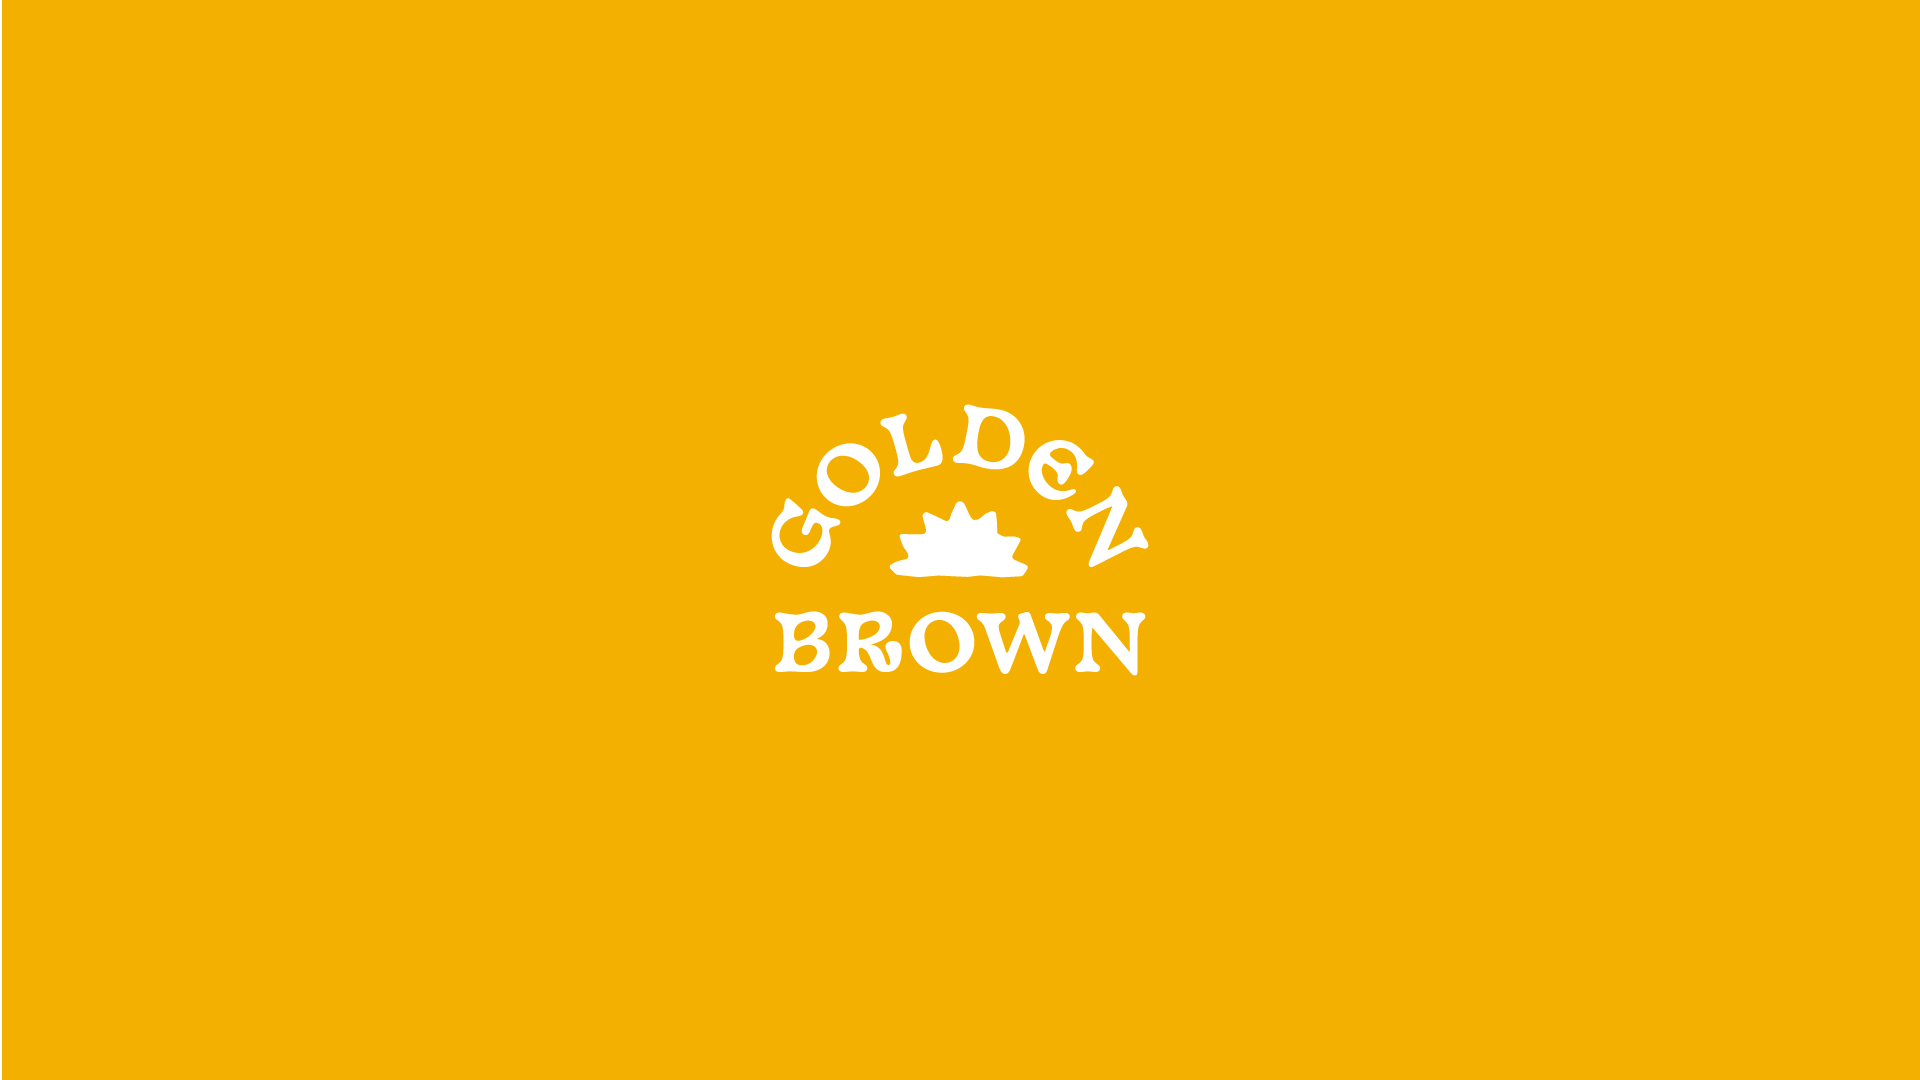 Golden Brown Coffee Gift Card